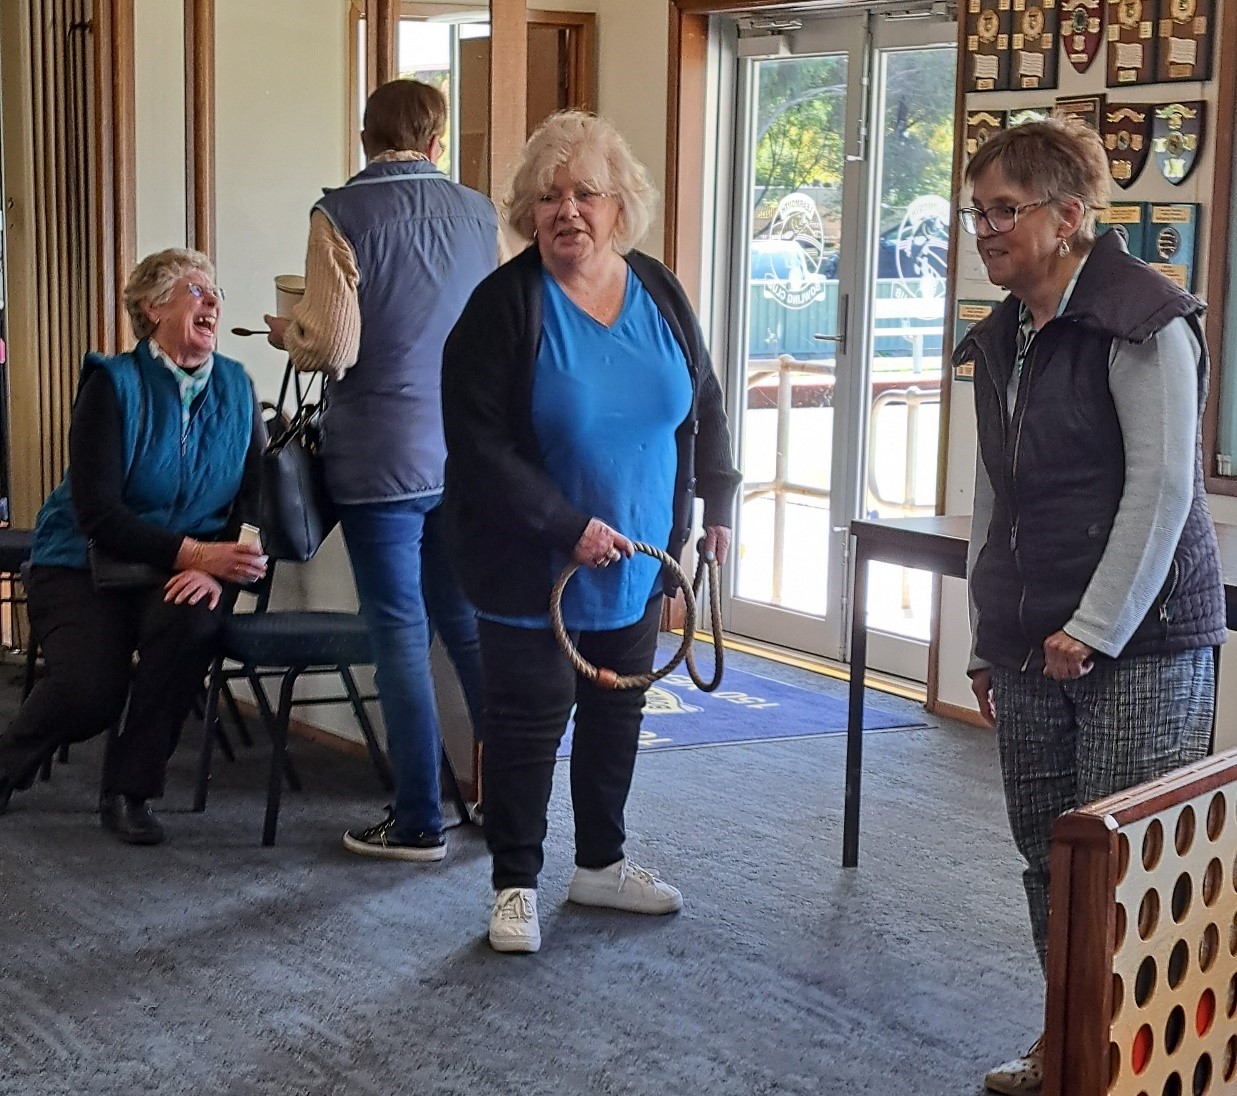 Residents at the Warrenheip Memorial Hall playing games